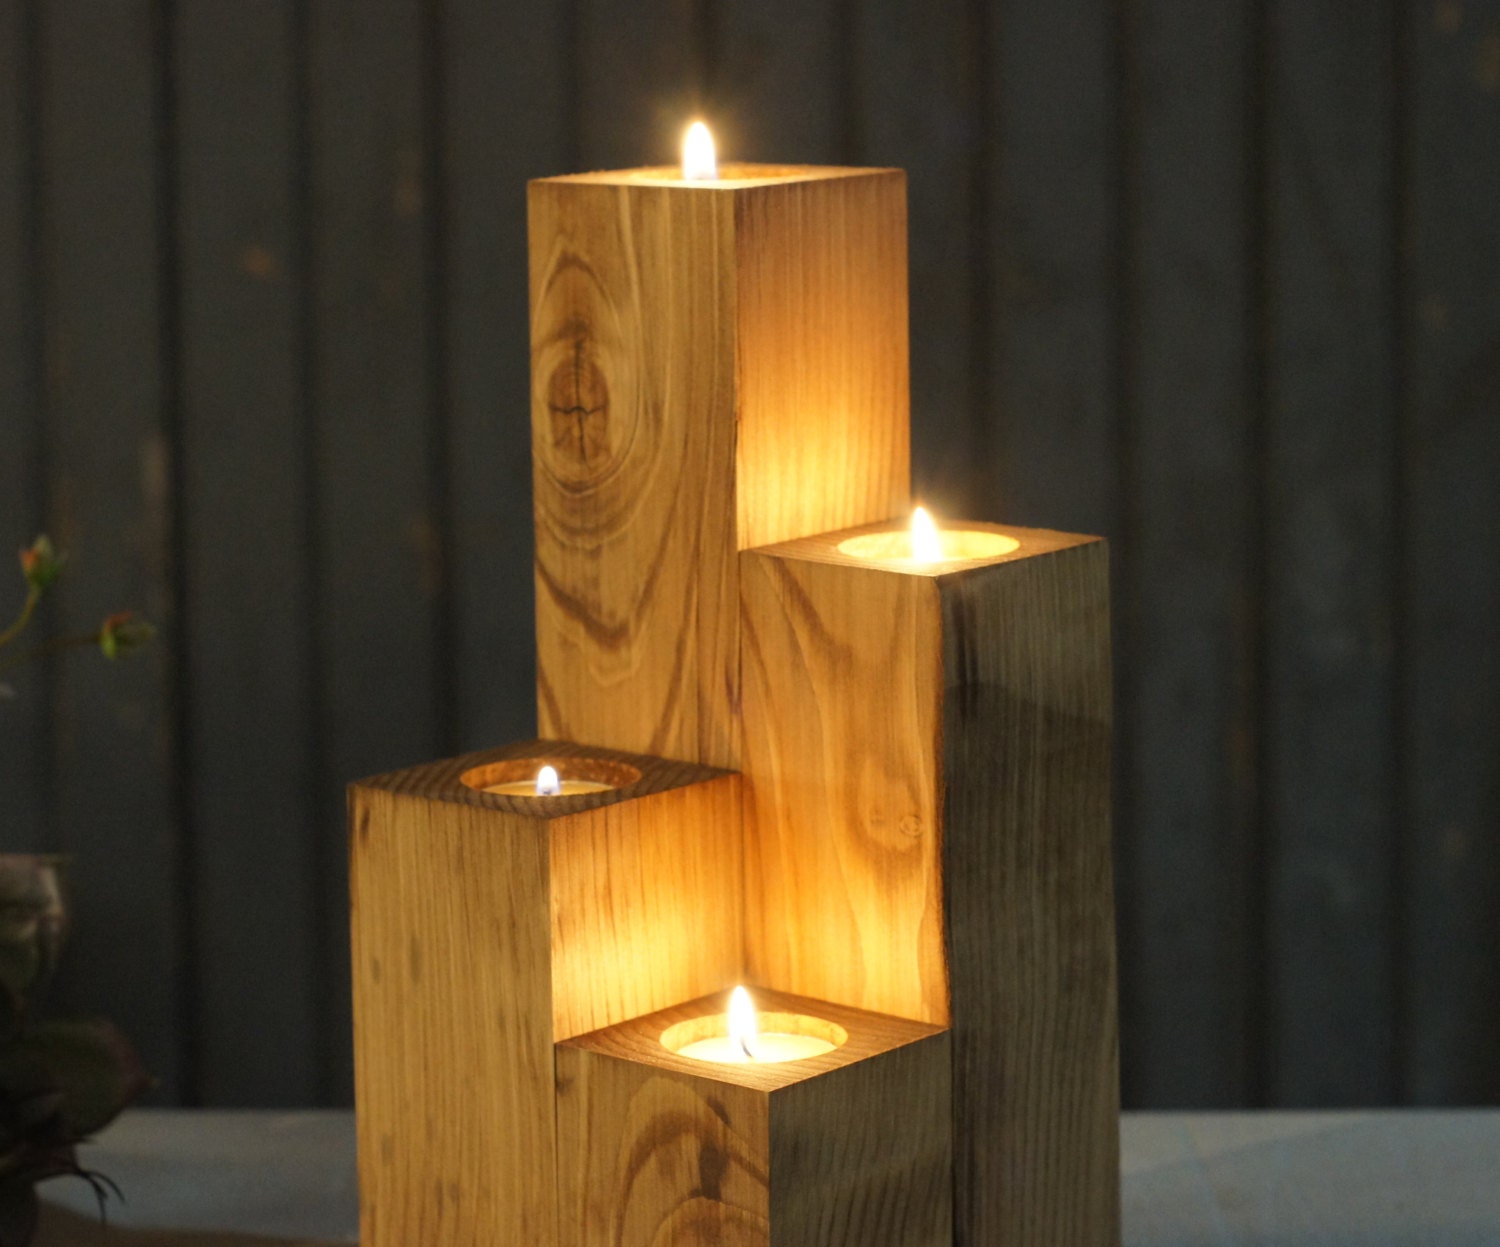 Reclaimed Wood Candle Holder Rustic Tealight By Gftwoodcraft